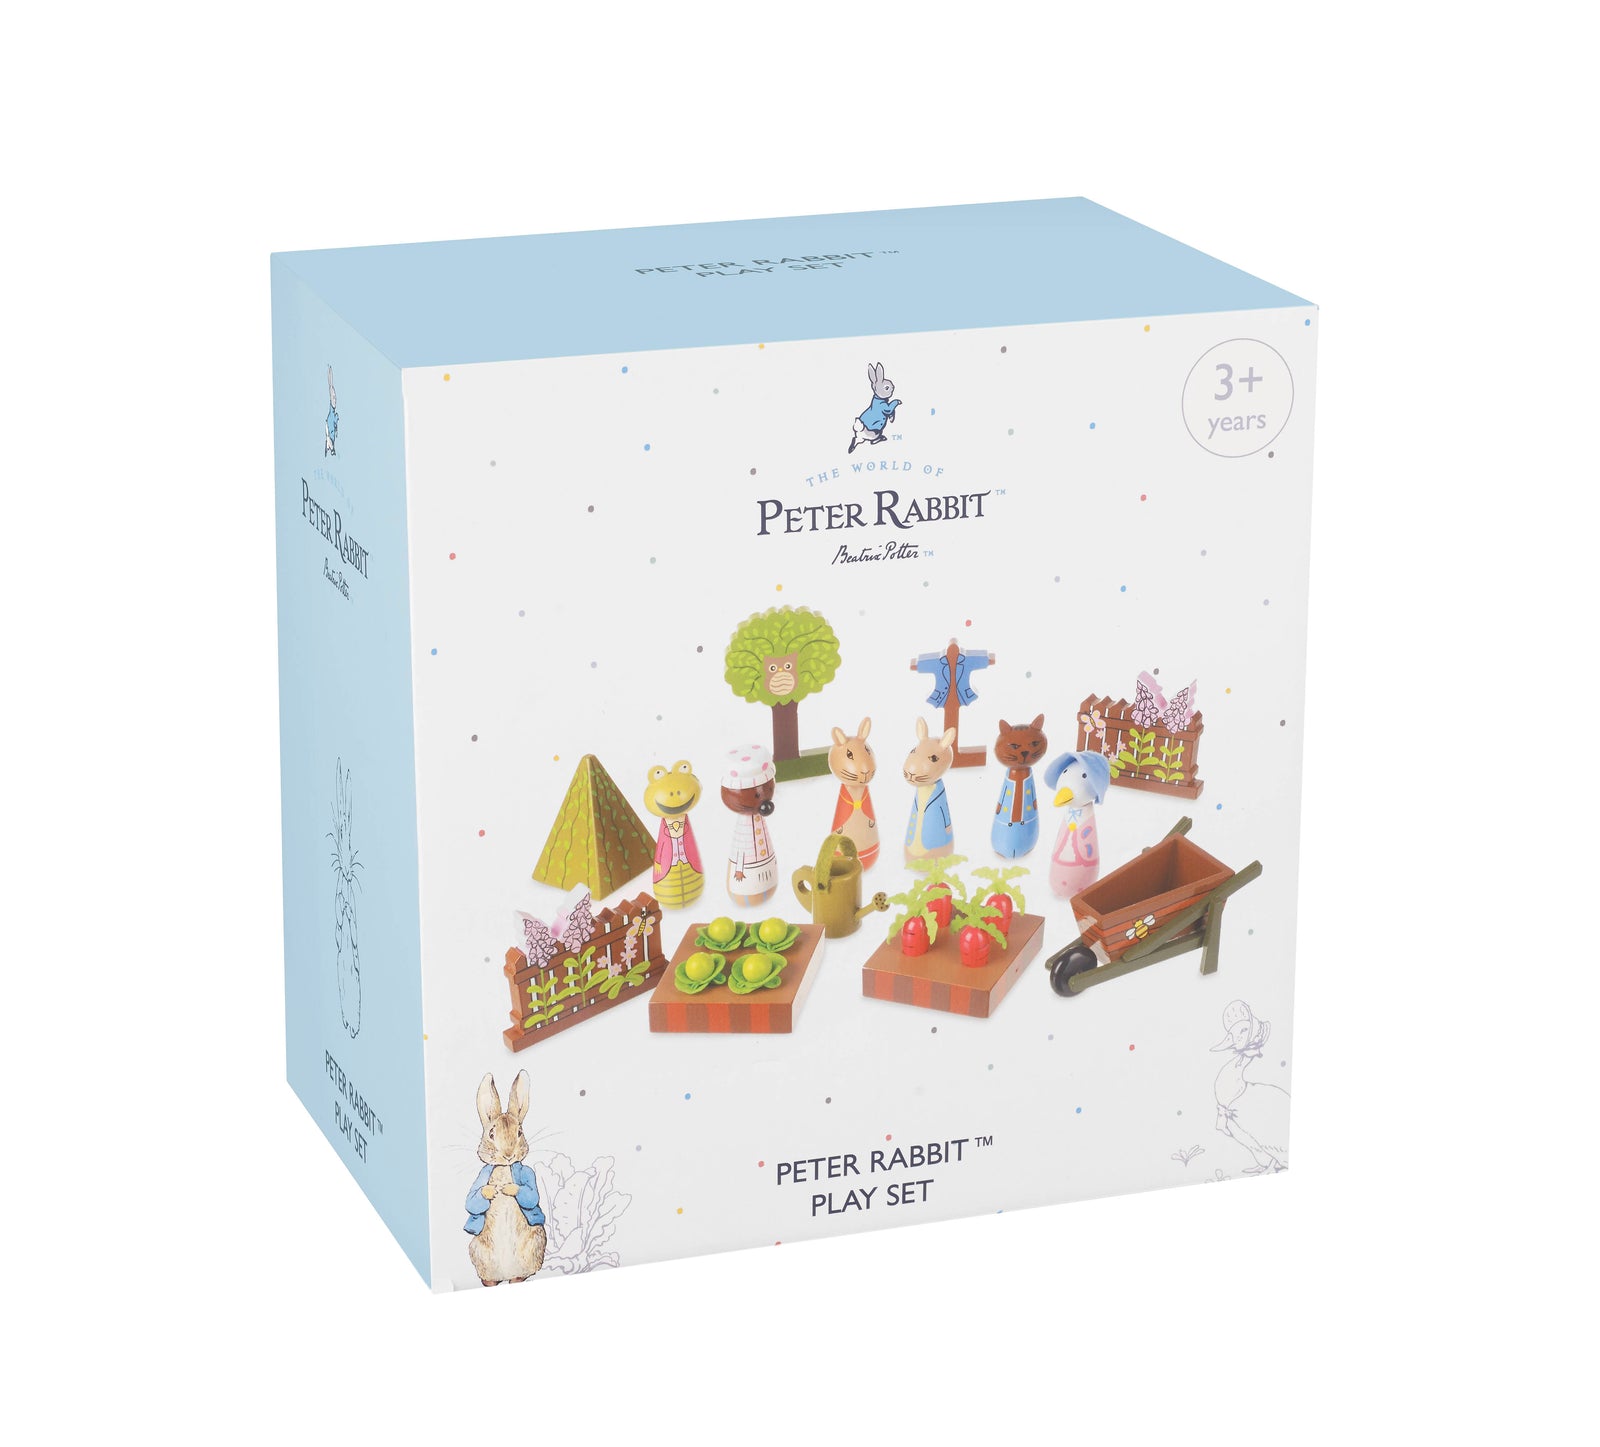 Peter Rabbit™ Play Set wooden garden for 3 years old